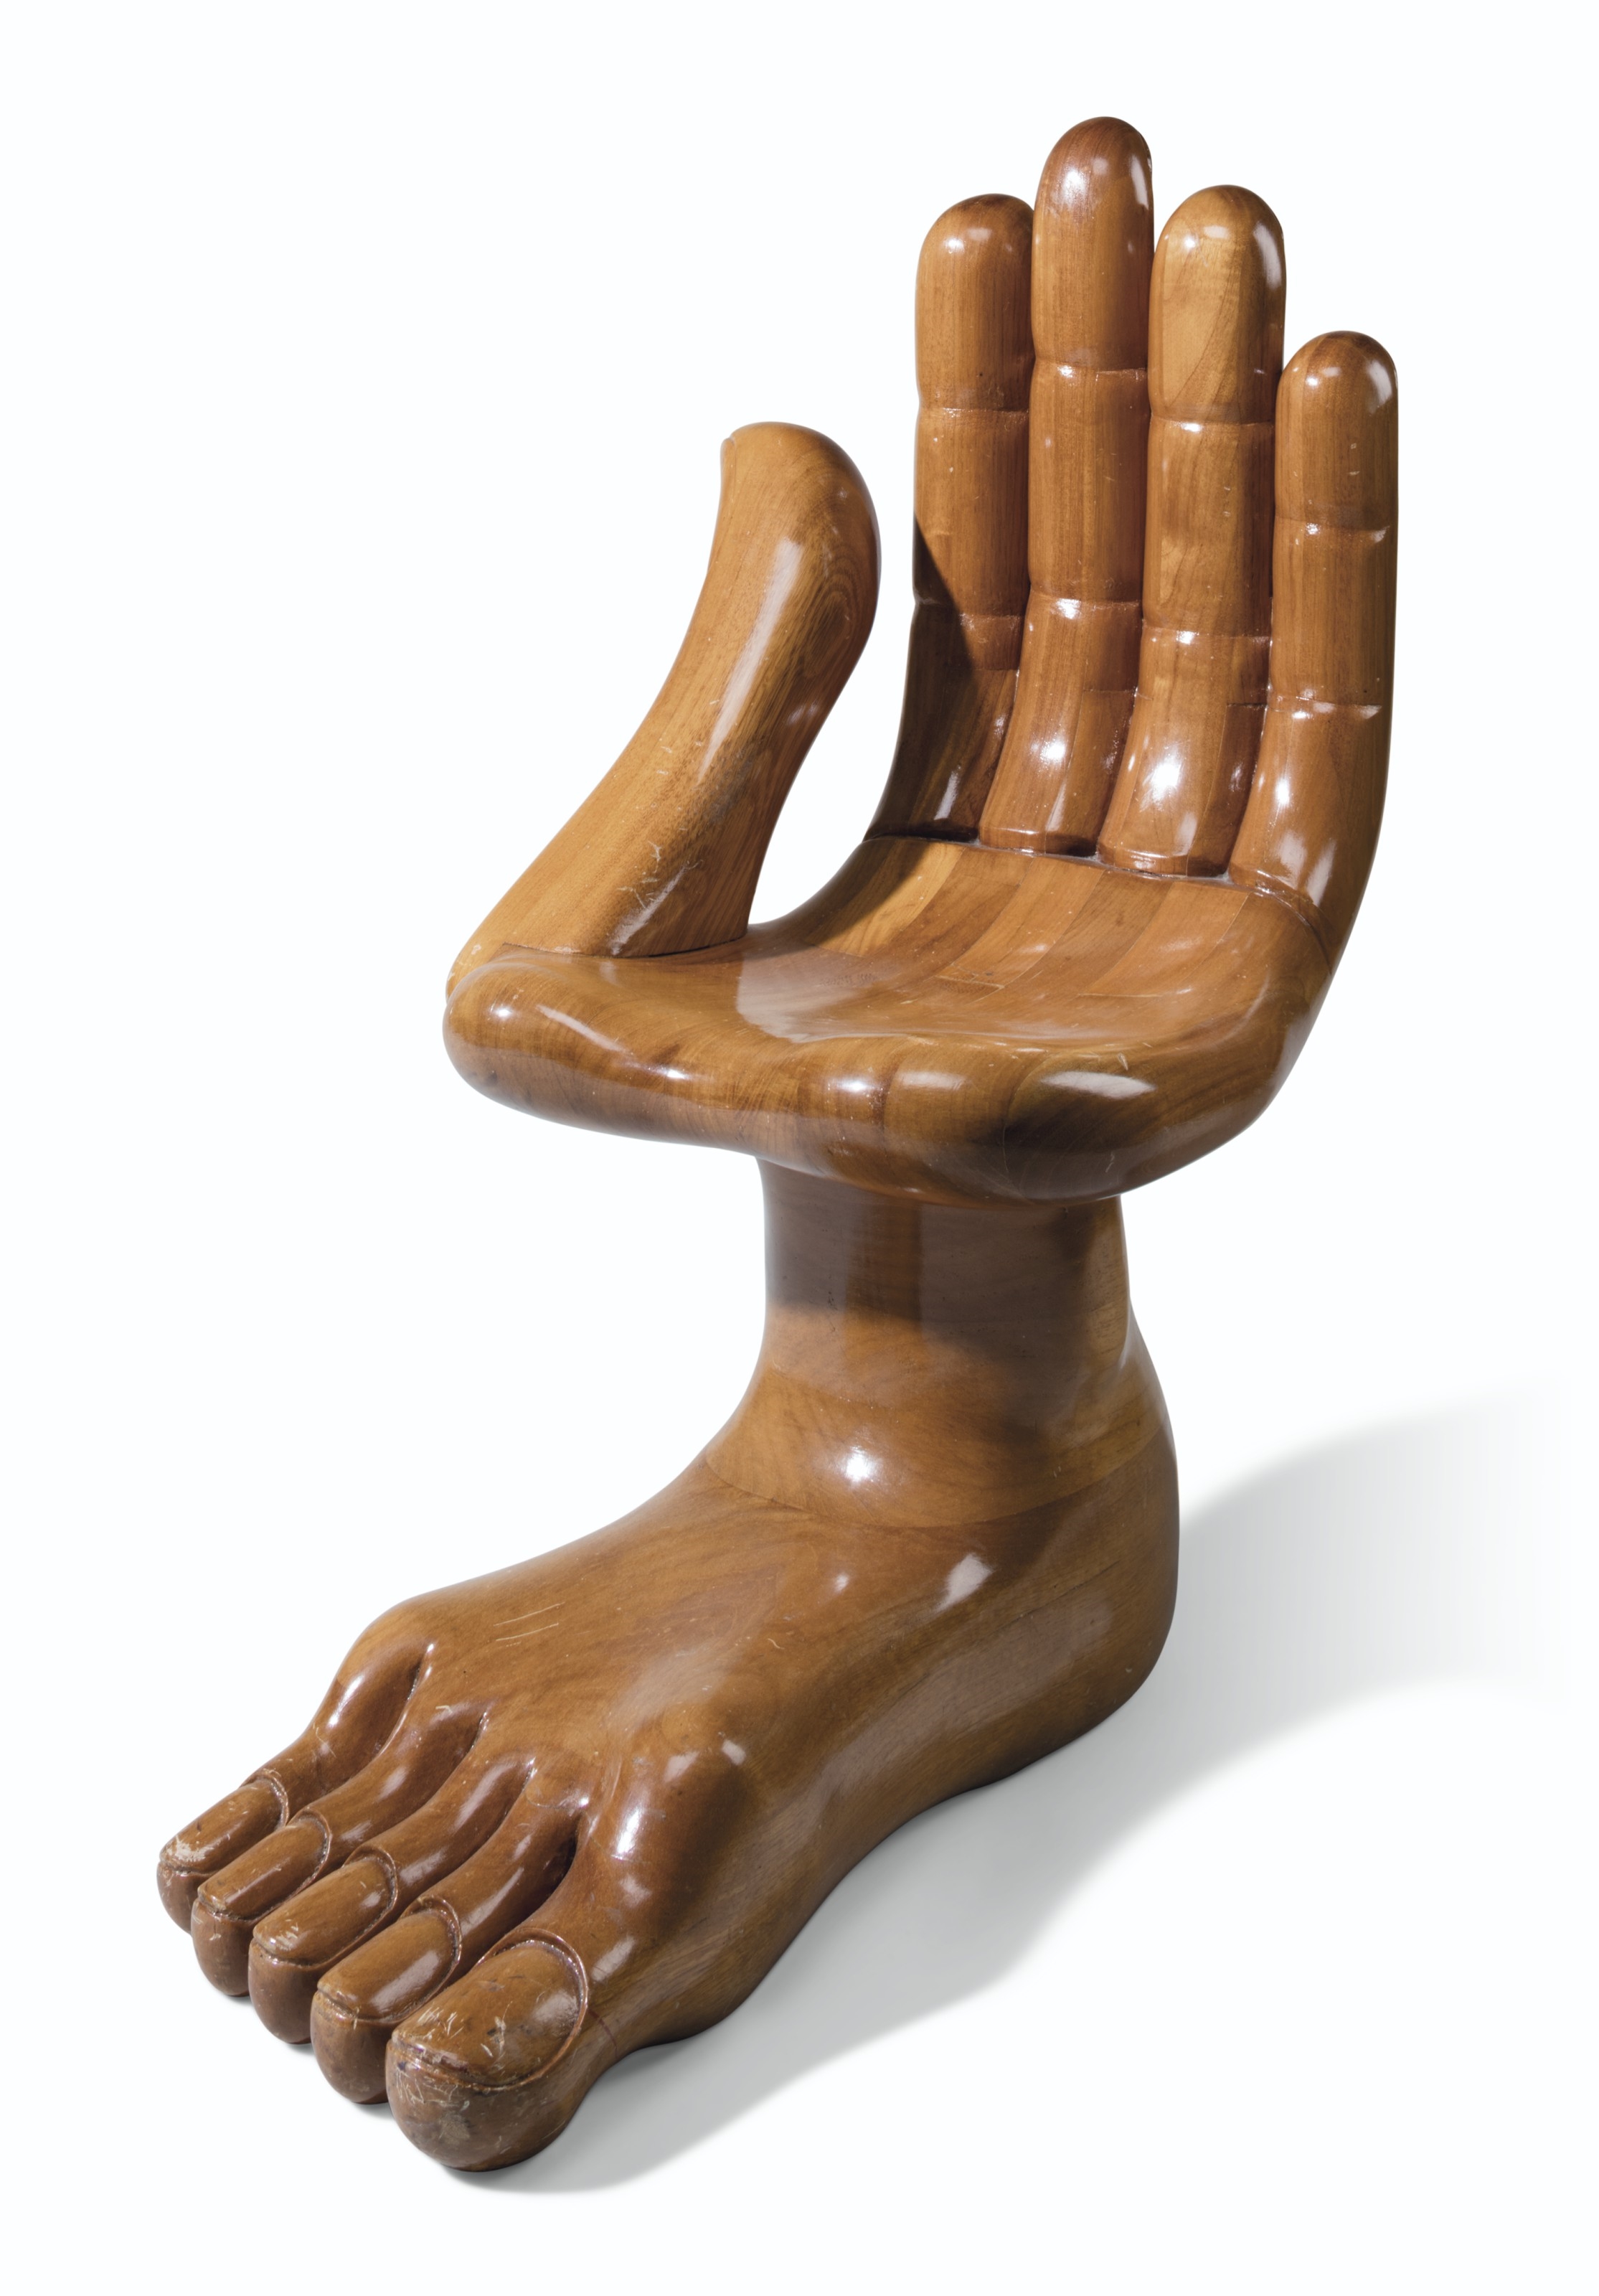 Hand and Foot Chair by Pedro Friedeberg, Executed in 2000